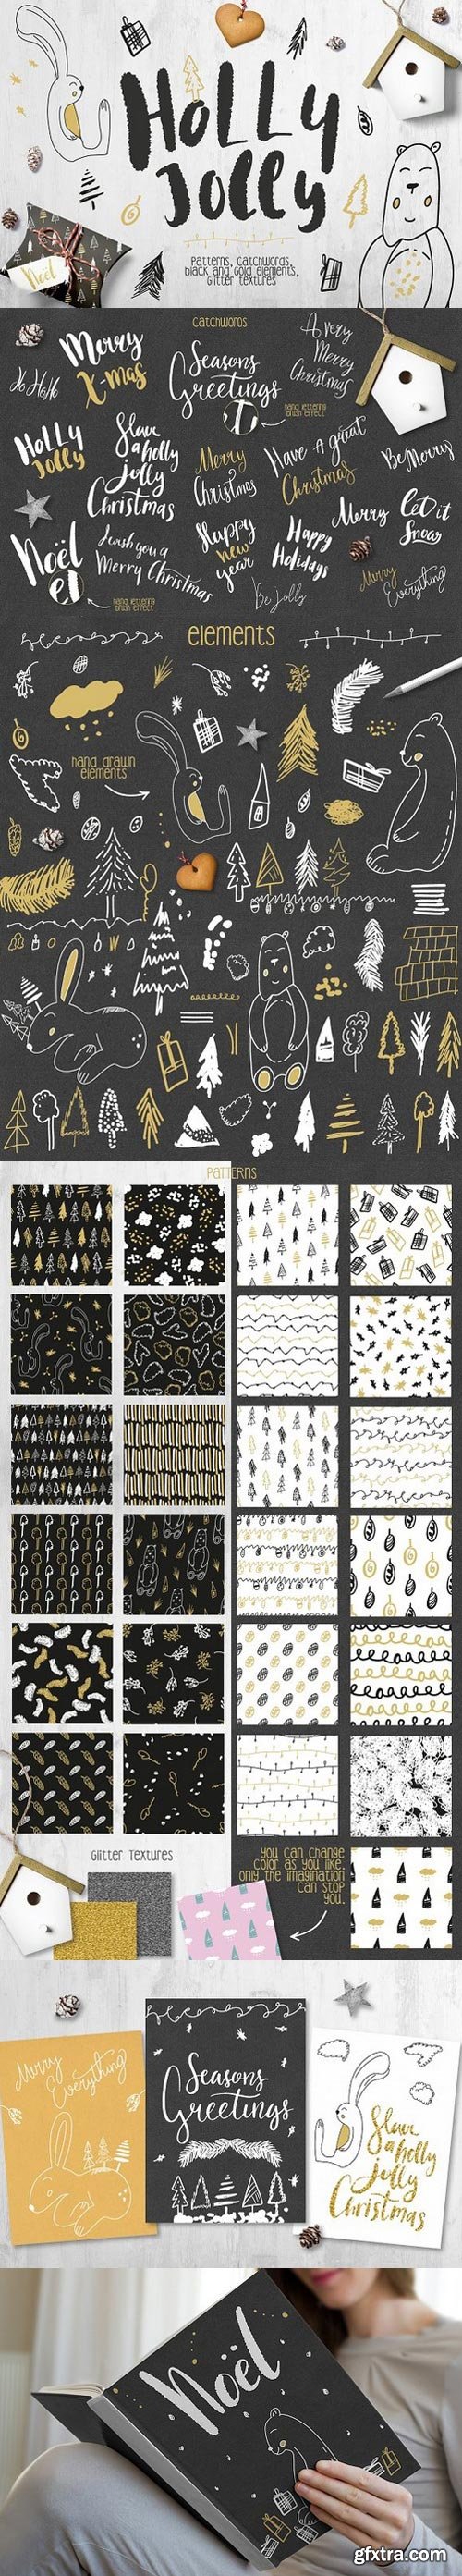 CM - Holly Jolly Collection • Patterns 1088570